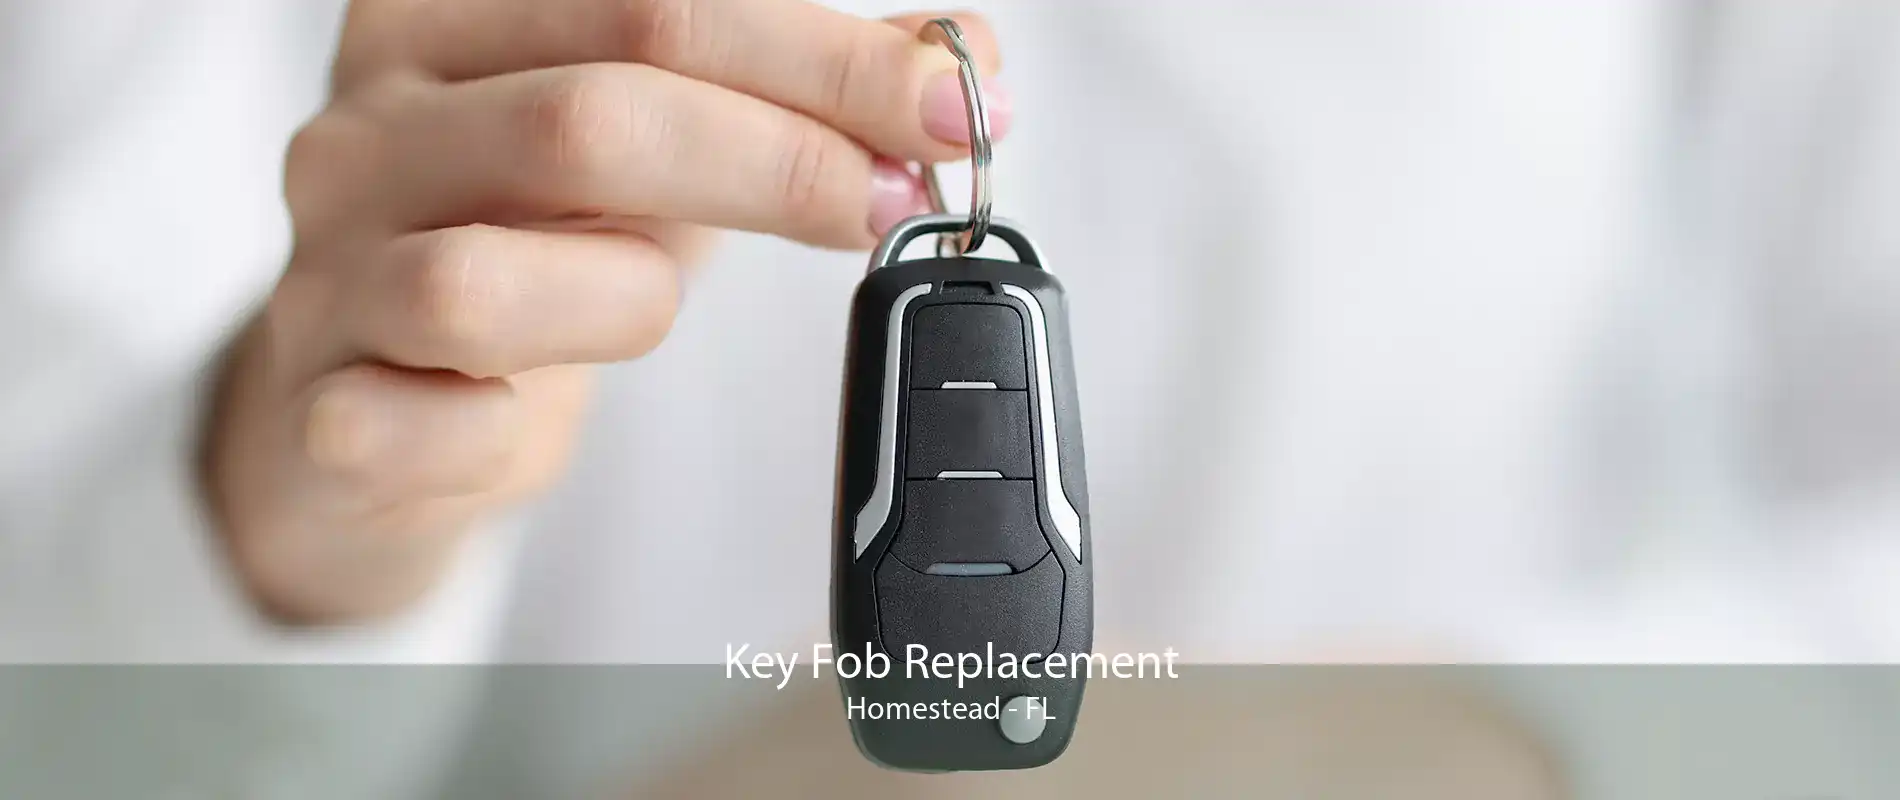 Key Fob Replacement Homestead - FL